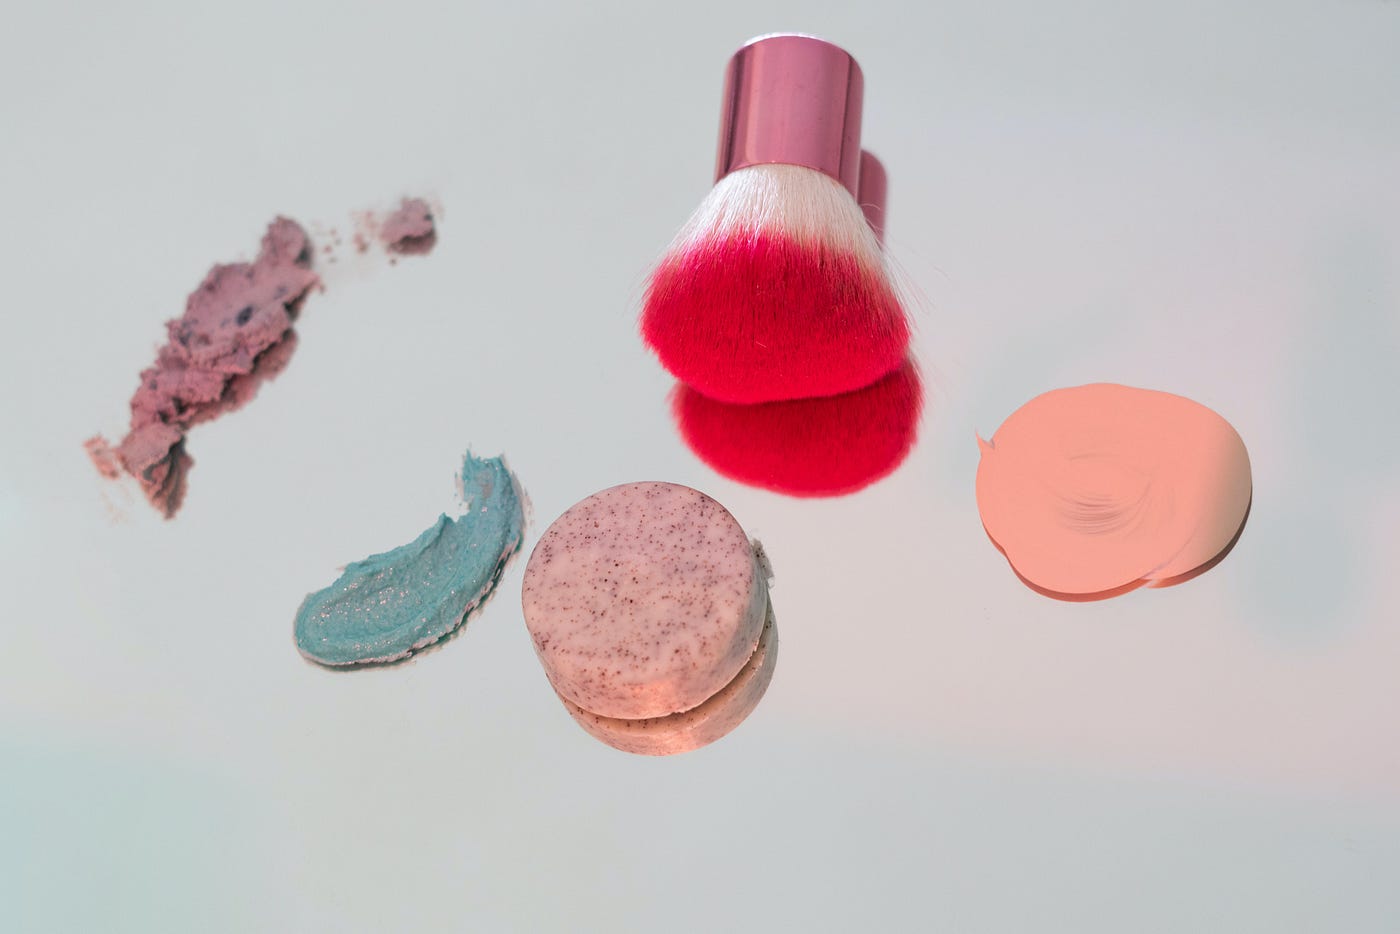 CI 77491: Red Iron Oxide in Makeup